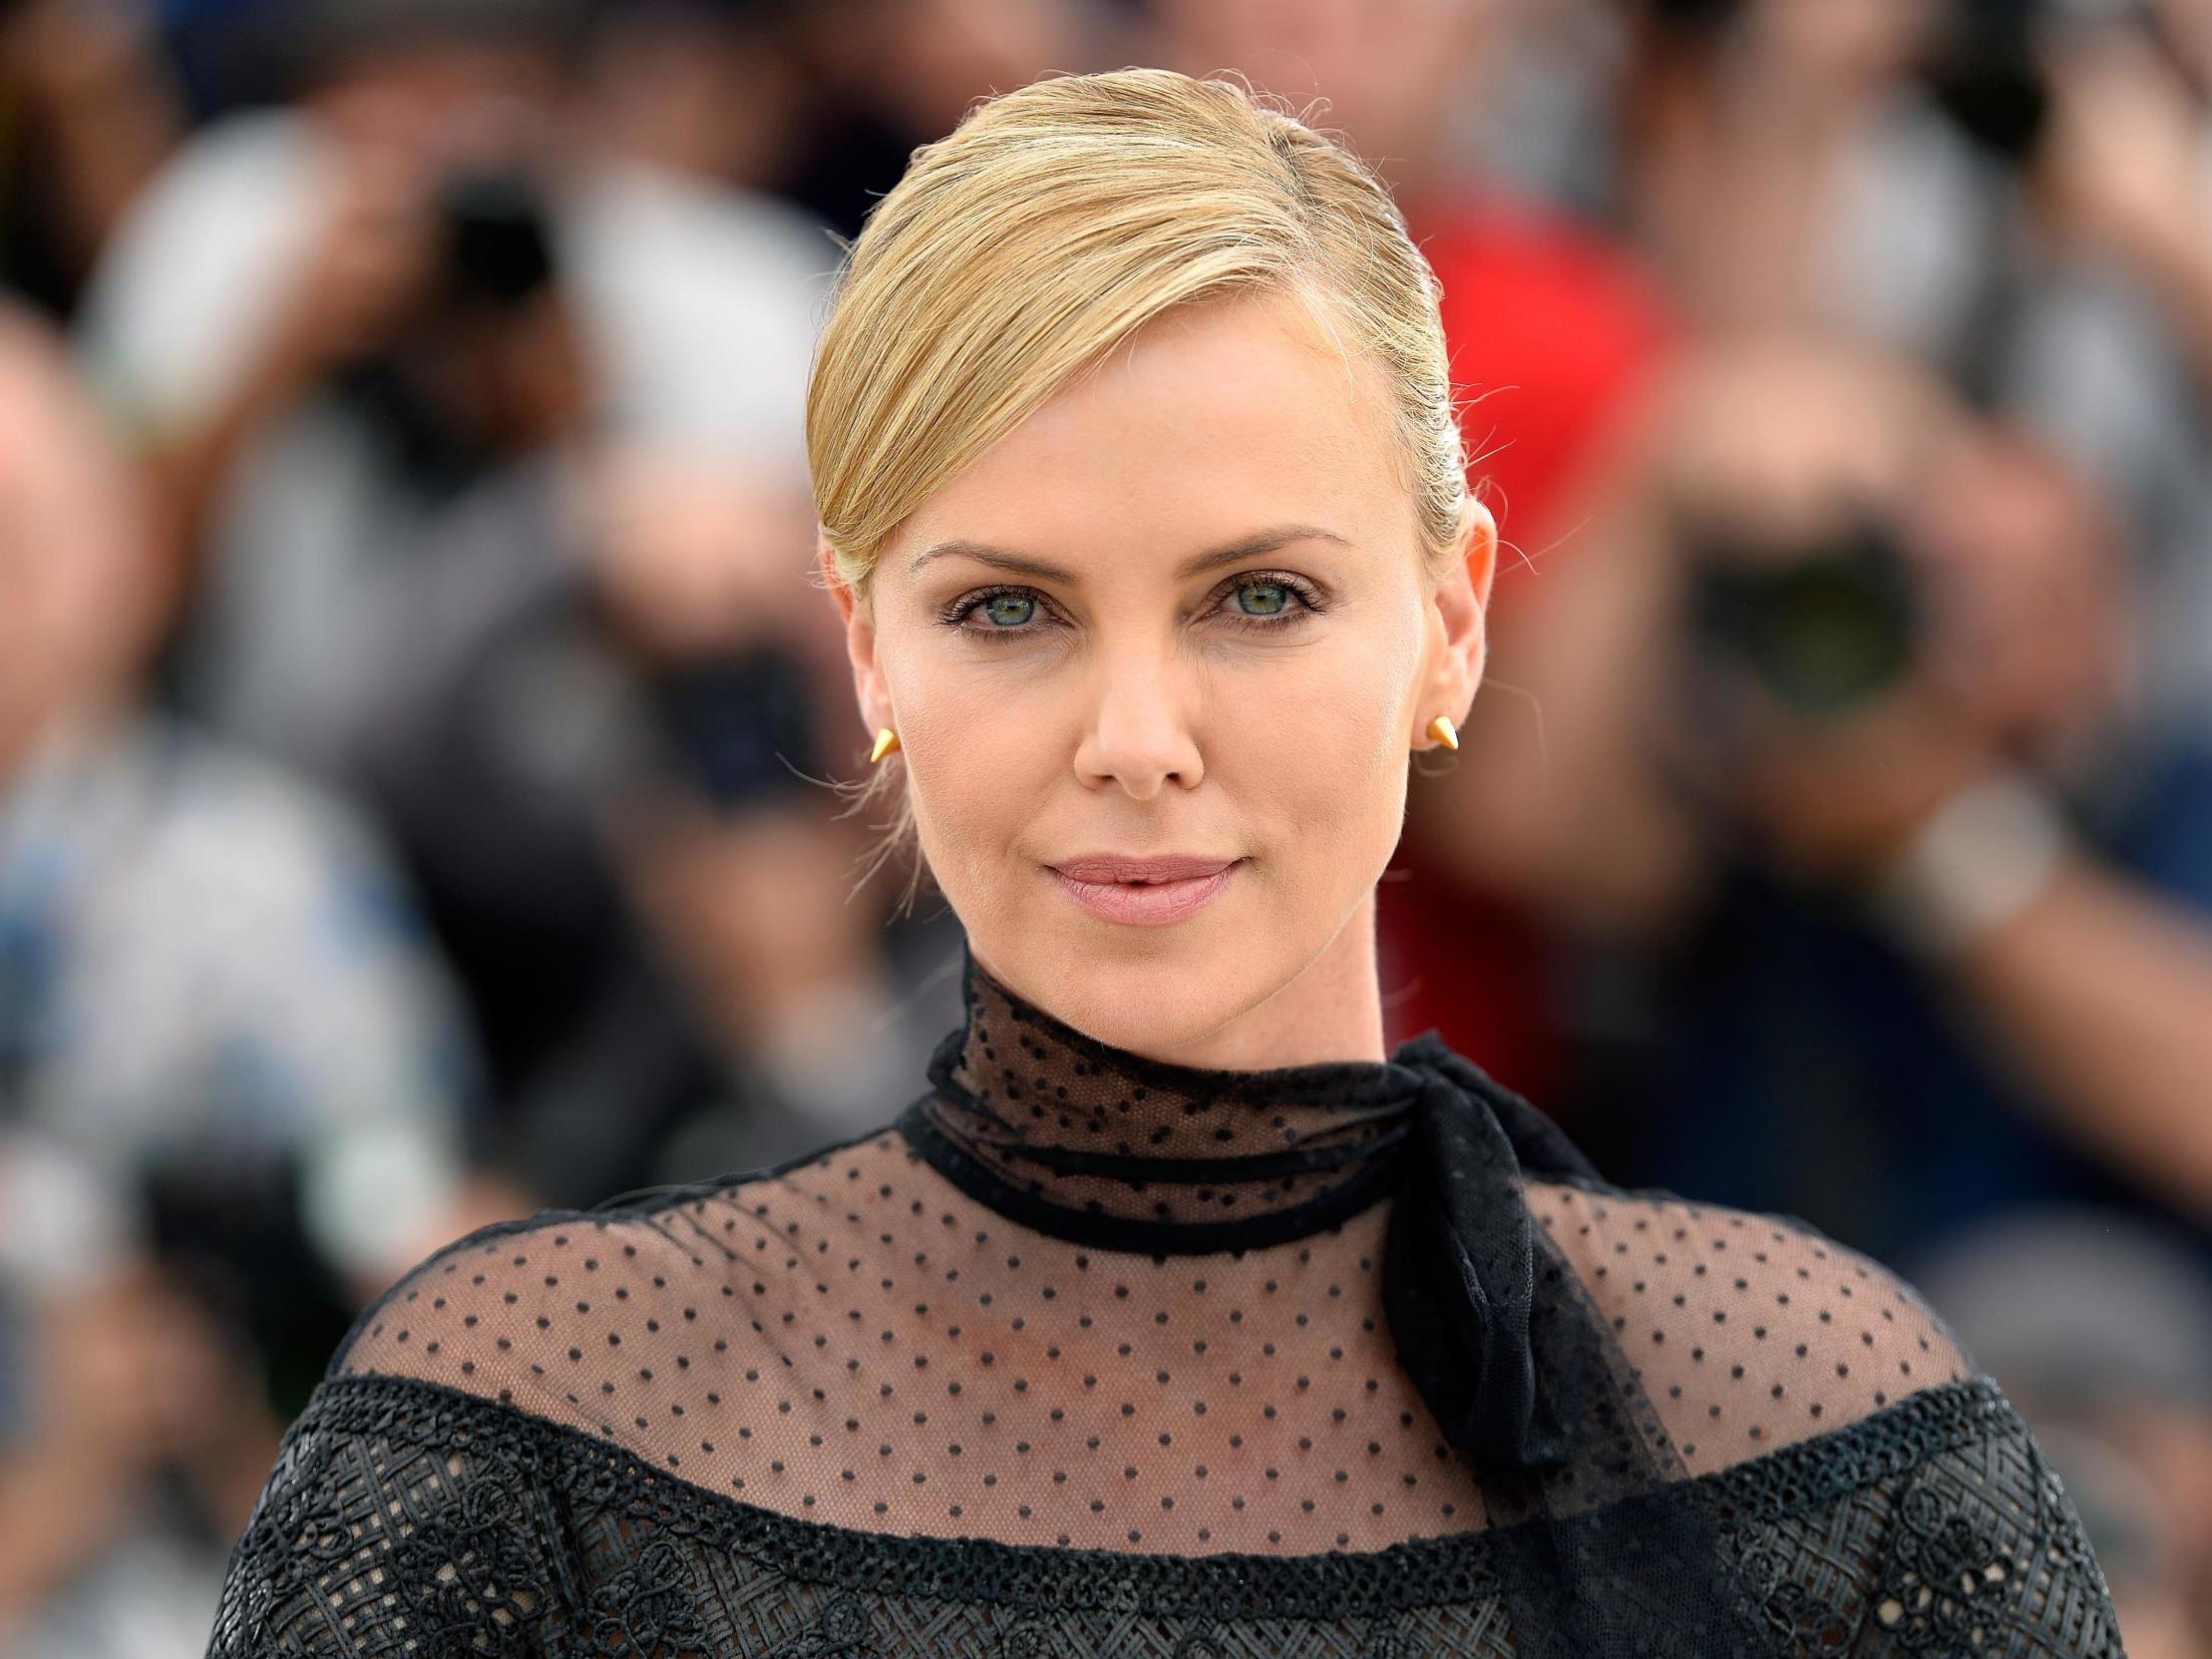 Charlize Theron interview: 'Watching Bombshell has been eye